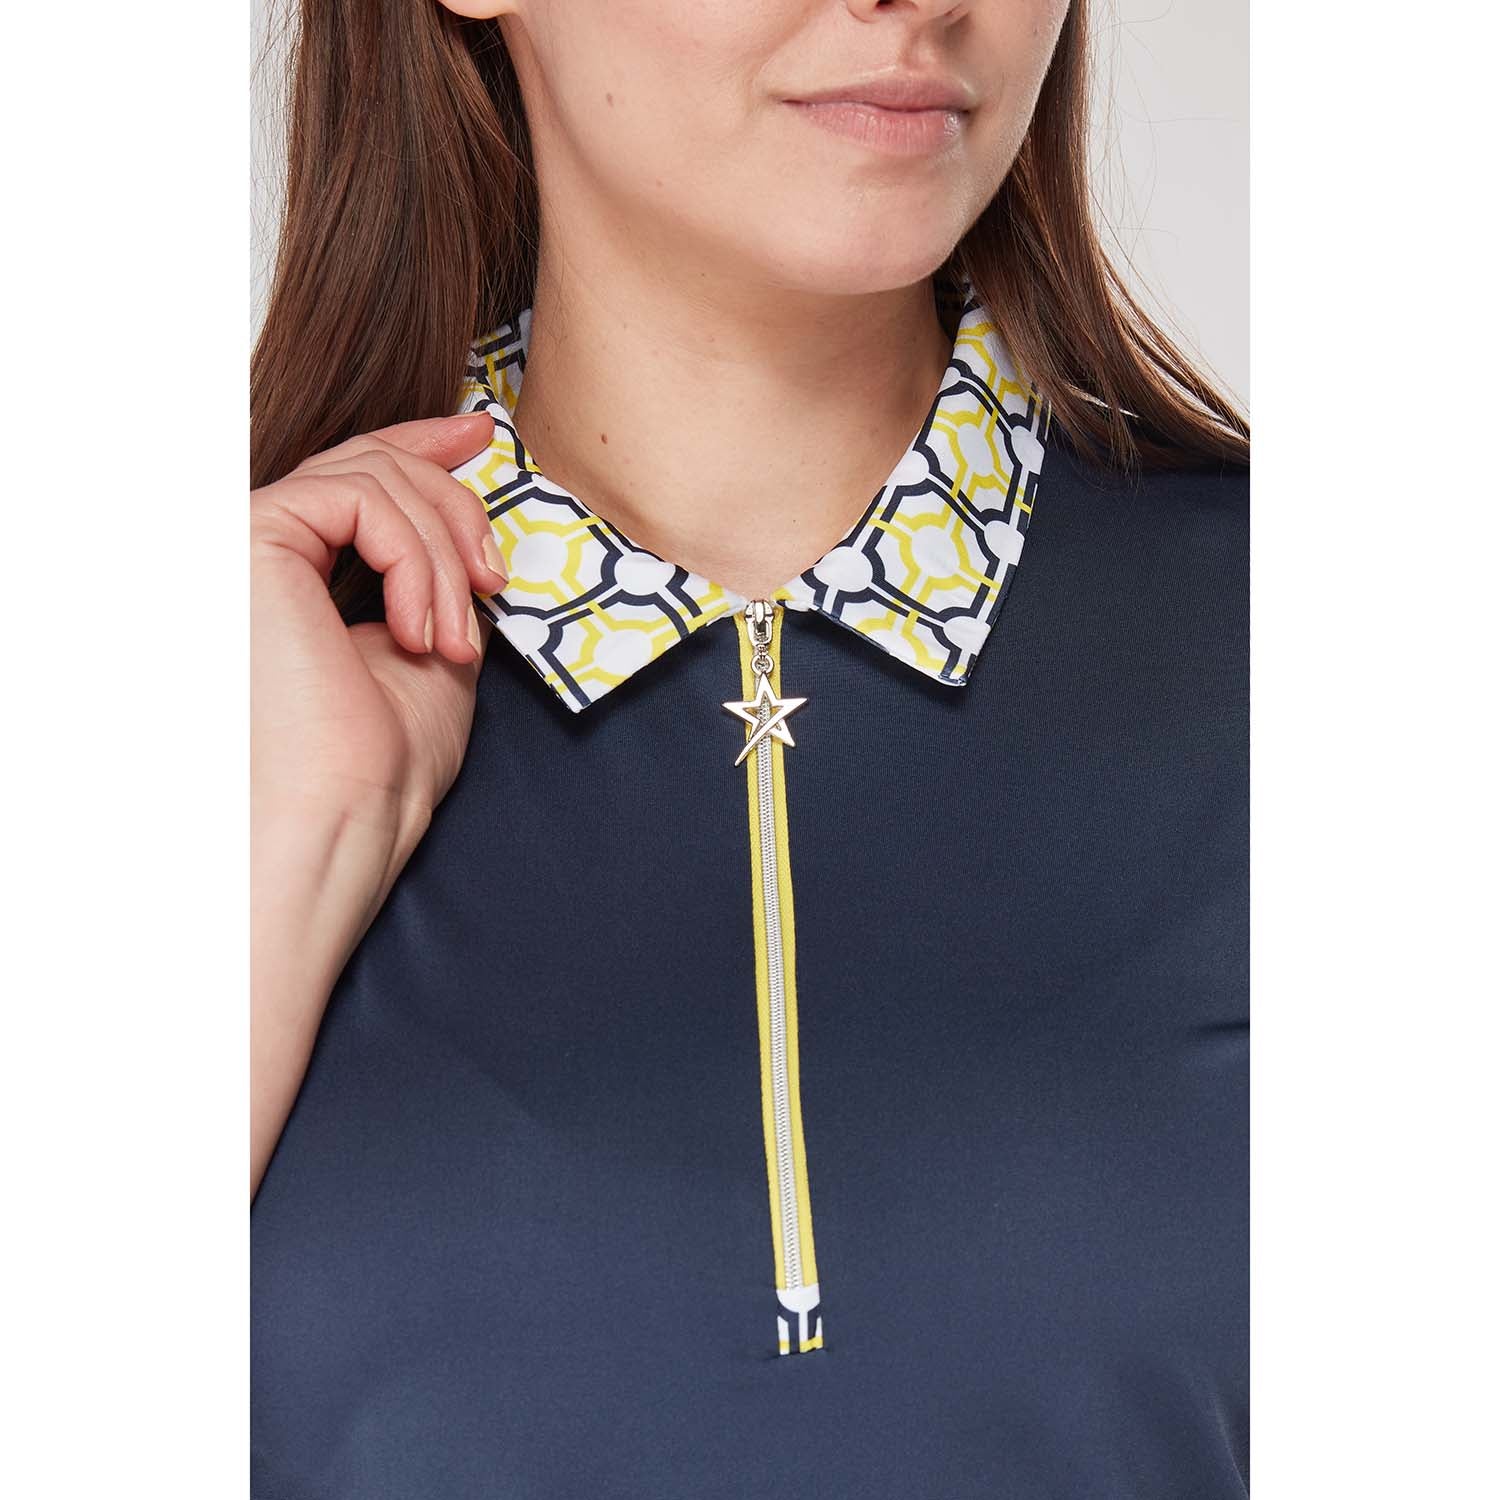 Swing Out Sister Ladies Zip-Neck Short Sleeve Polo with Sunshine and Navy Mosaic Pattern Print